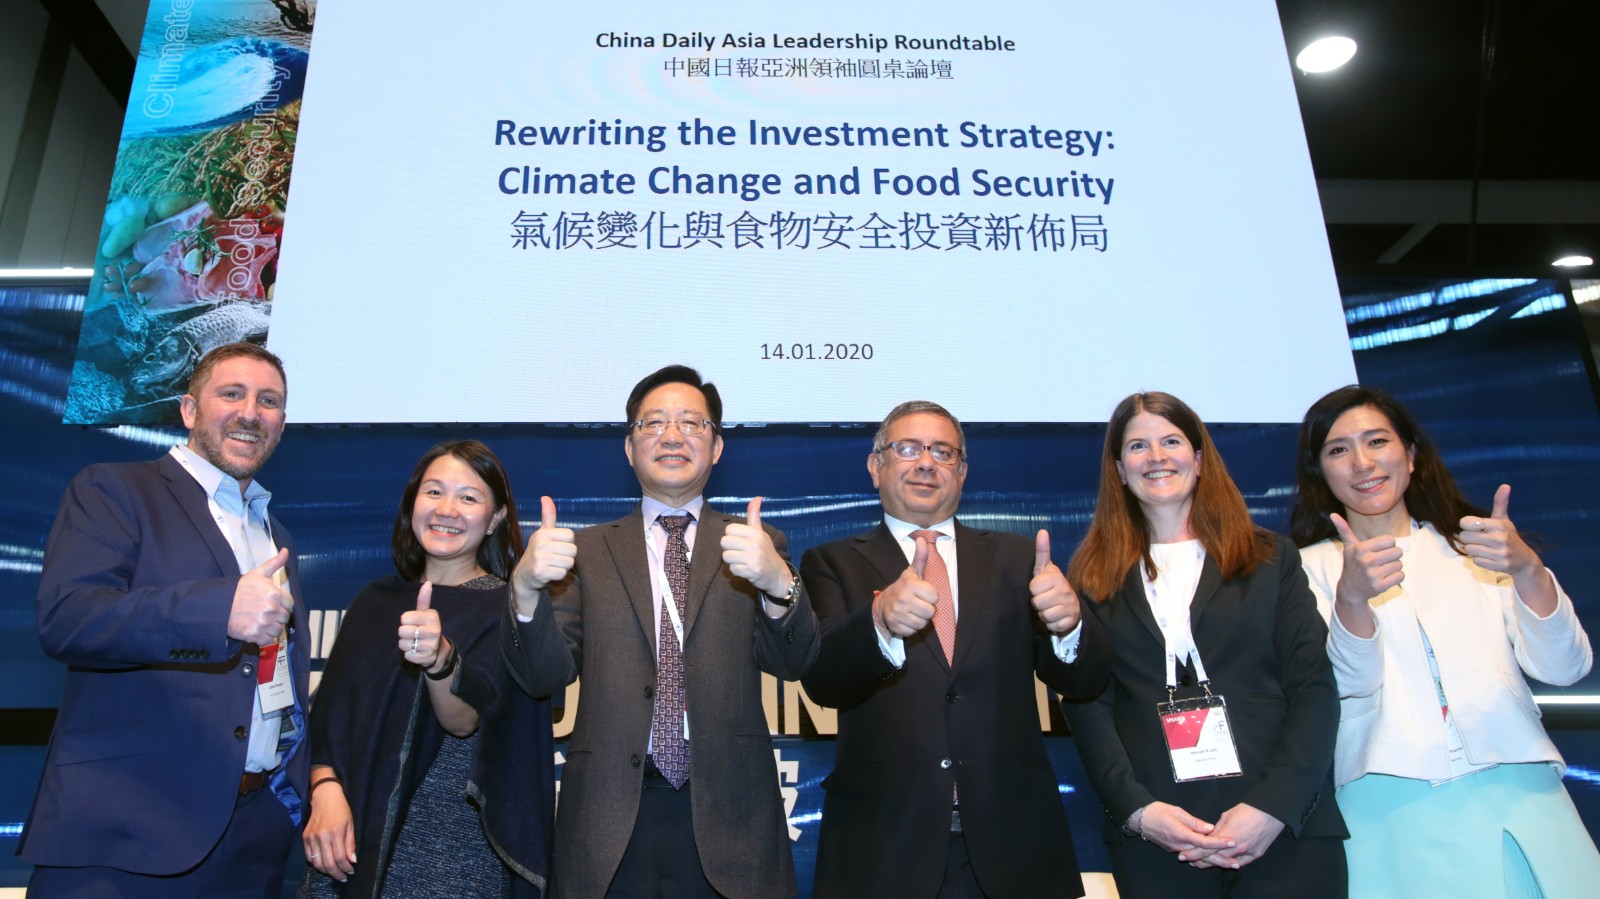 Rewriting the Investment Strategy: Climate Change and Food Security